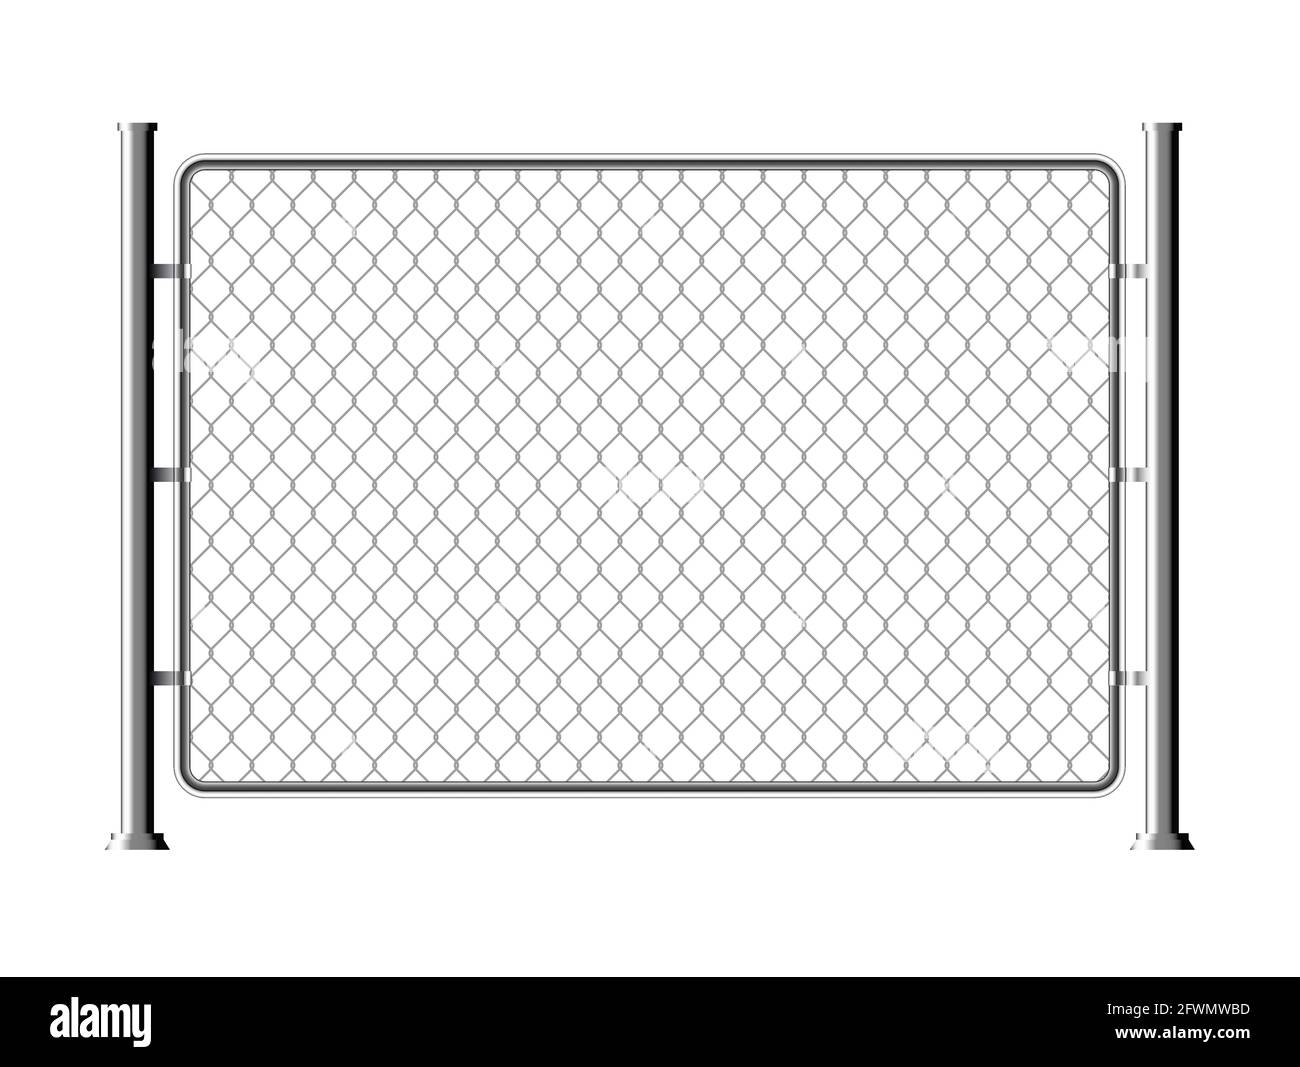 Fence wire metal chain link. Mesh steel net texture fence cage